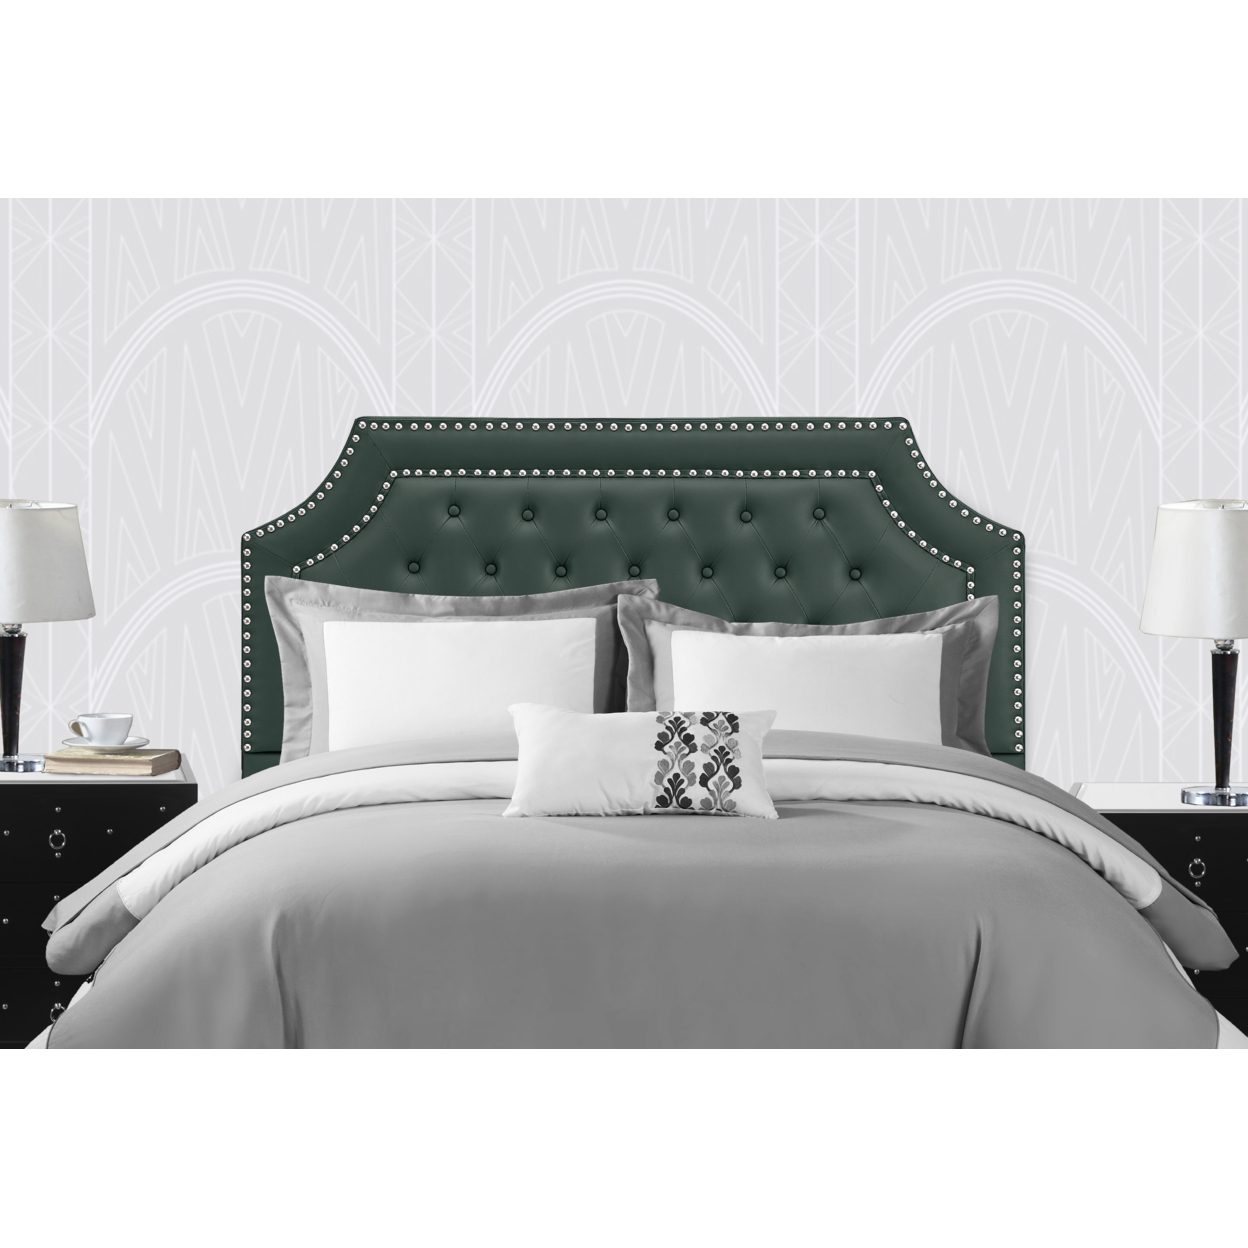 Chic Home Mahlon Headboard PU Leather Upholstered Button Tufted Double Row Silver Nailhead Trim - Green, Twin